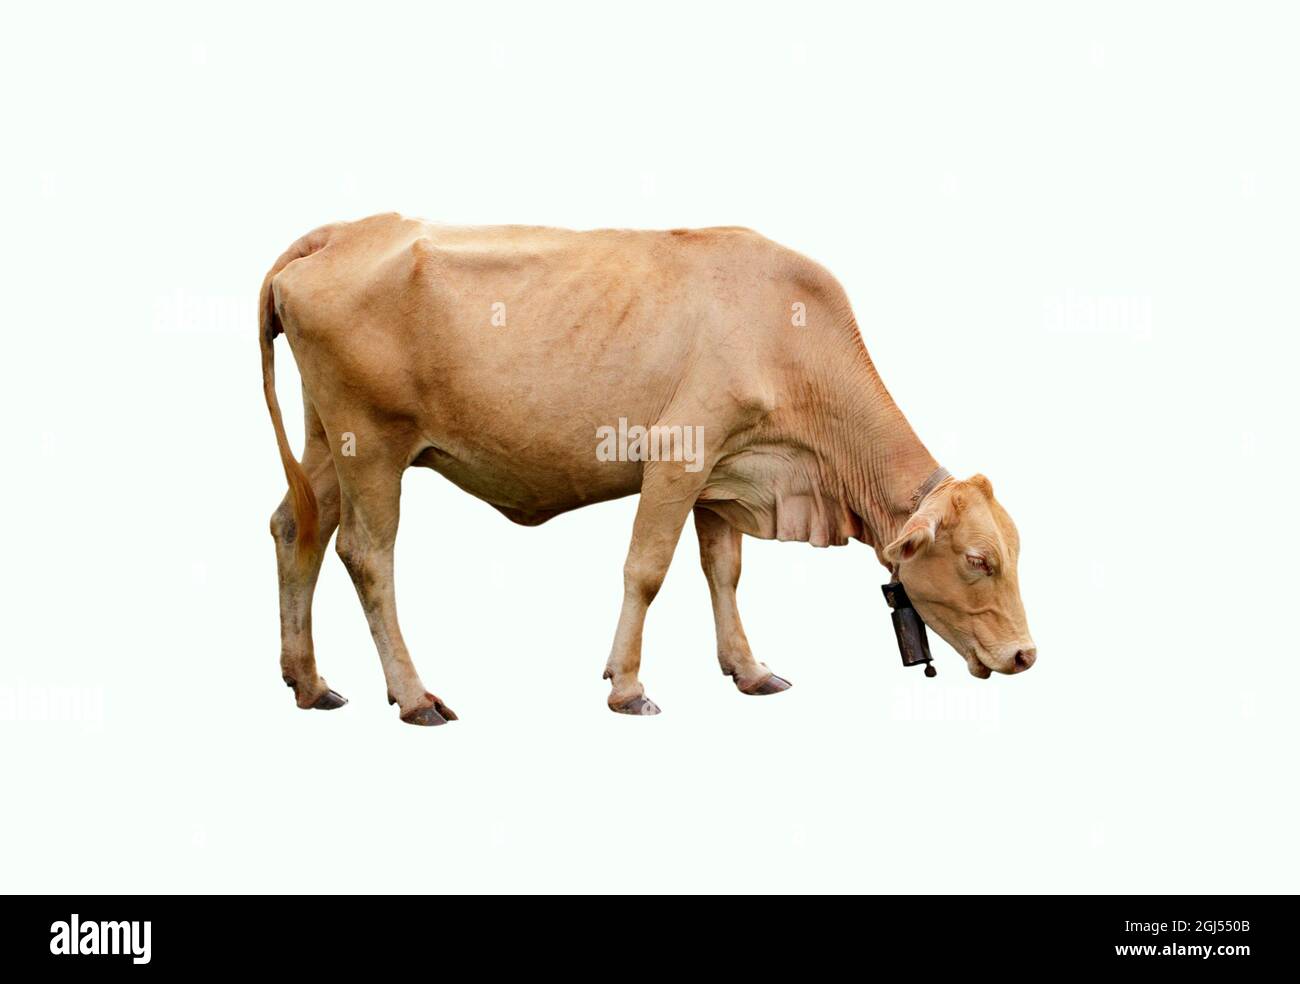 Image of brown cow isolated on a white background. Farm animals. Stock Photo